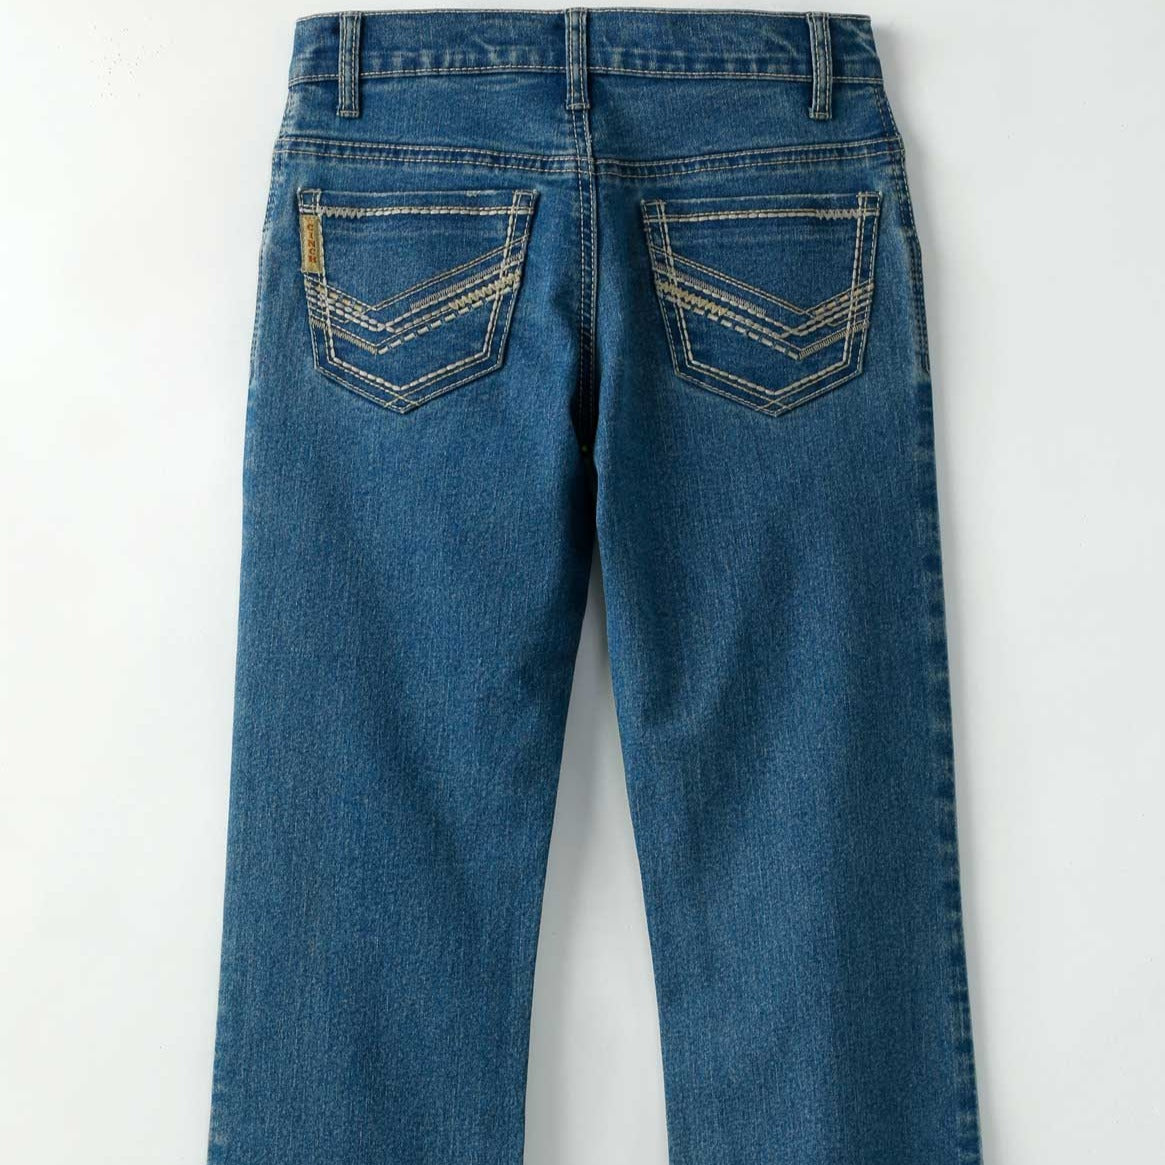 Cinch Boys Relaxed Fit Bootcut Jeans in Medium Stonewash